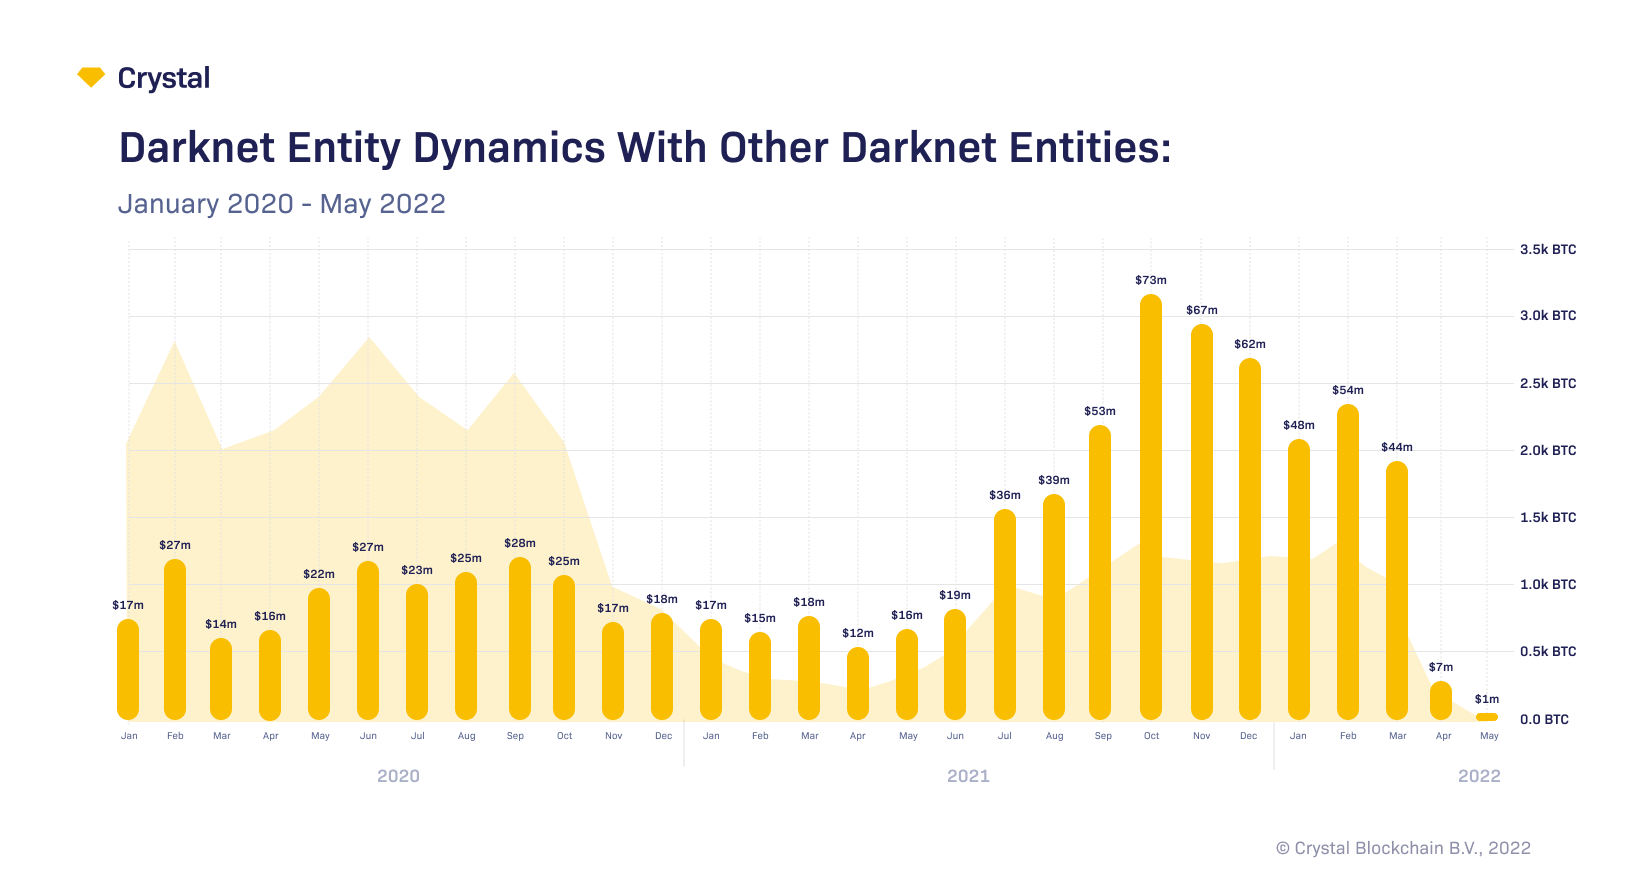 Darknet Entity Dynamics With Other Darknet Entities: January 2020 - May 2022